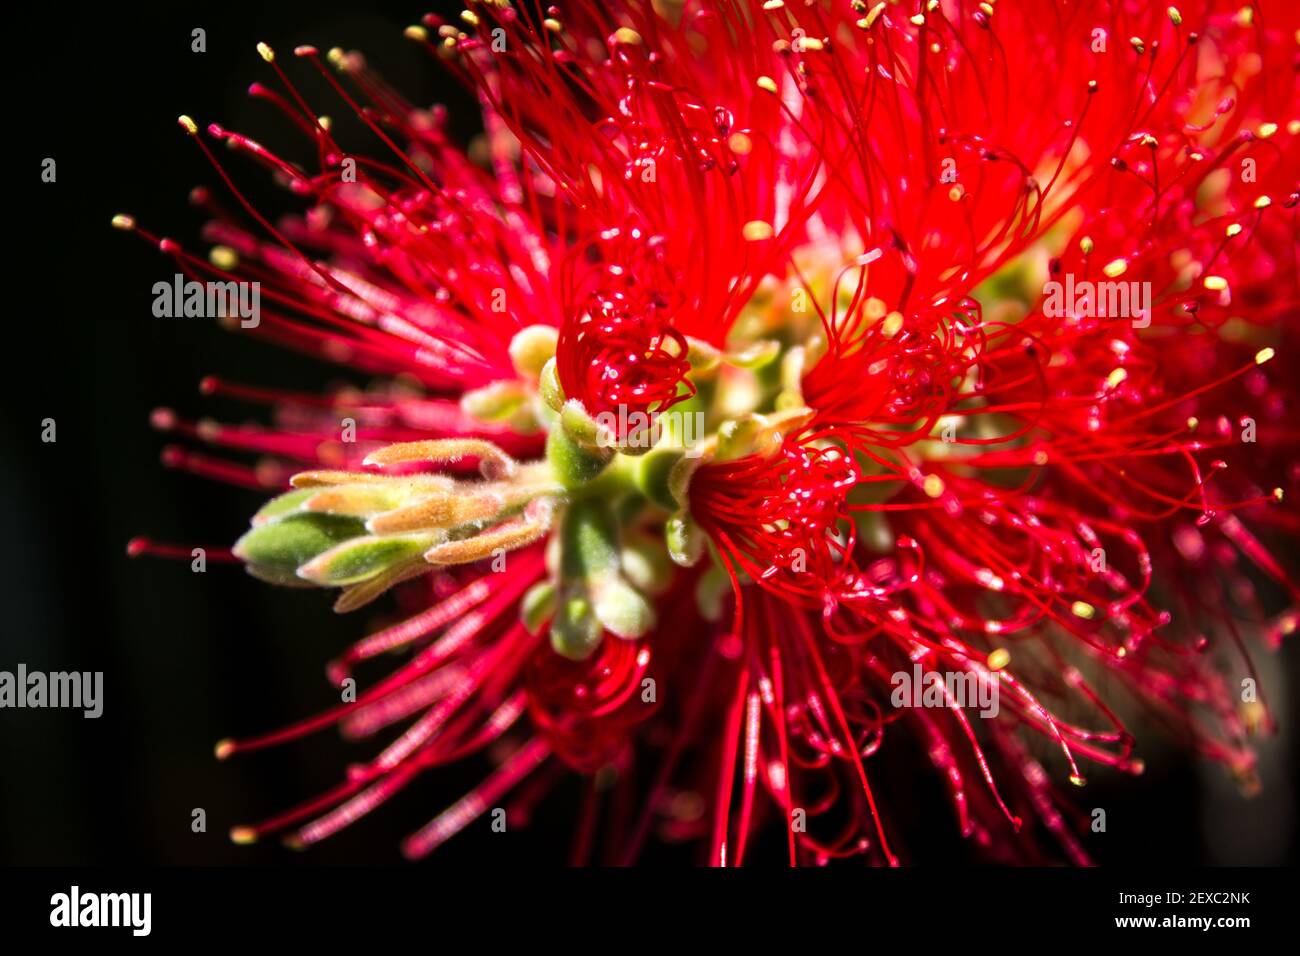 Close-up of the bright red Stamens of a Bottle brush, Melaleuca viminalis, against a black background Stock Photo